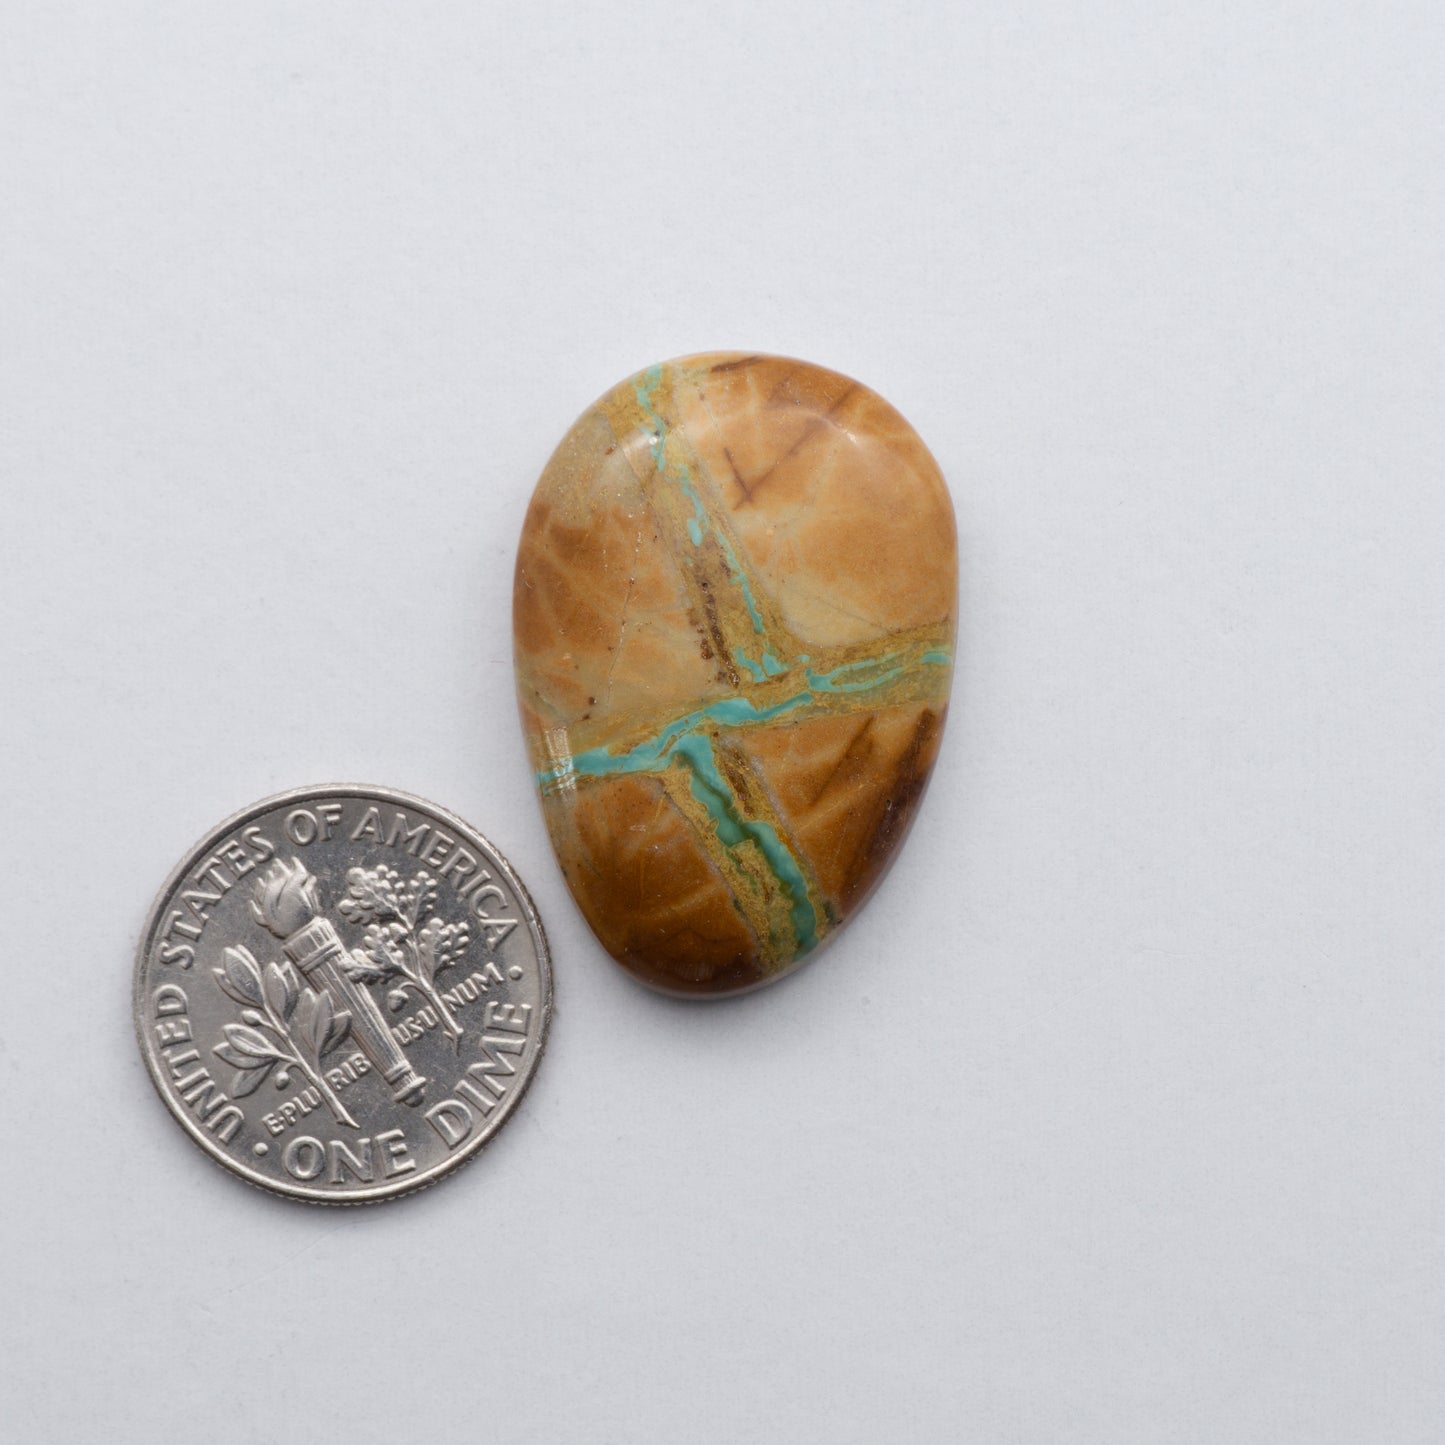 Crow Springs Ribbon Turquoise cabochon